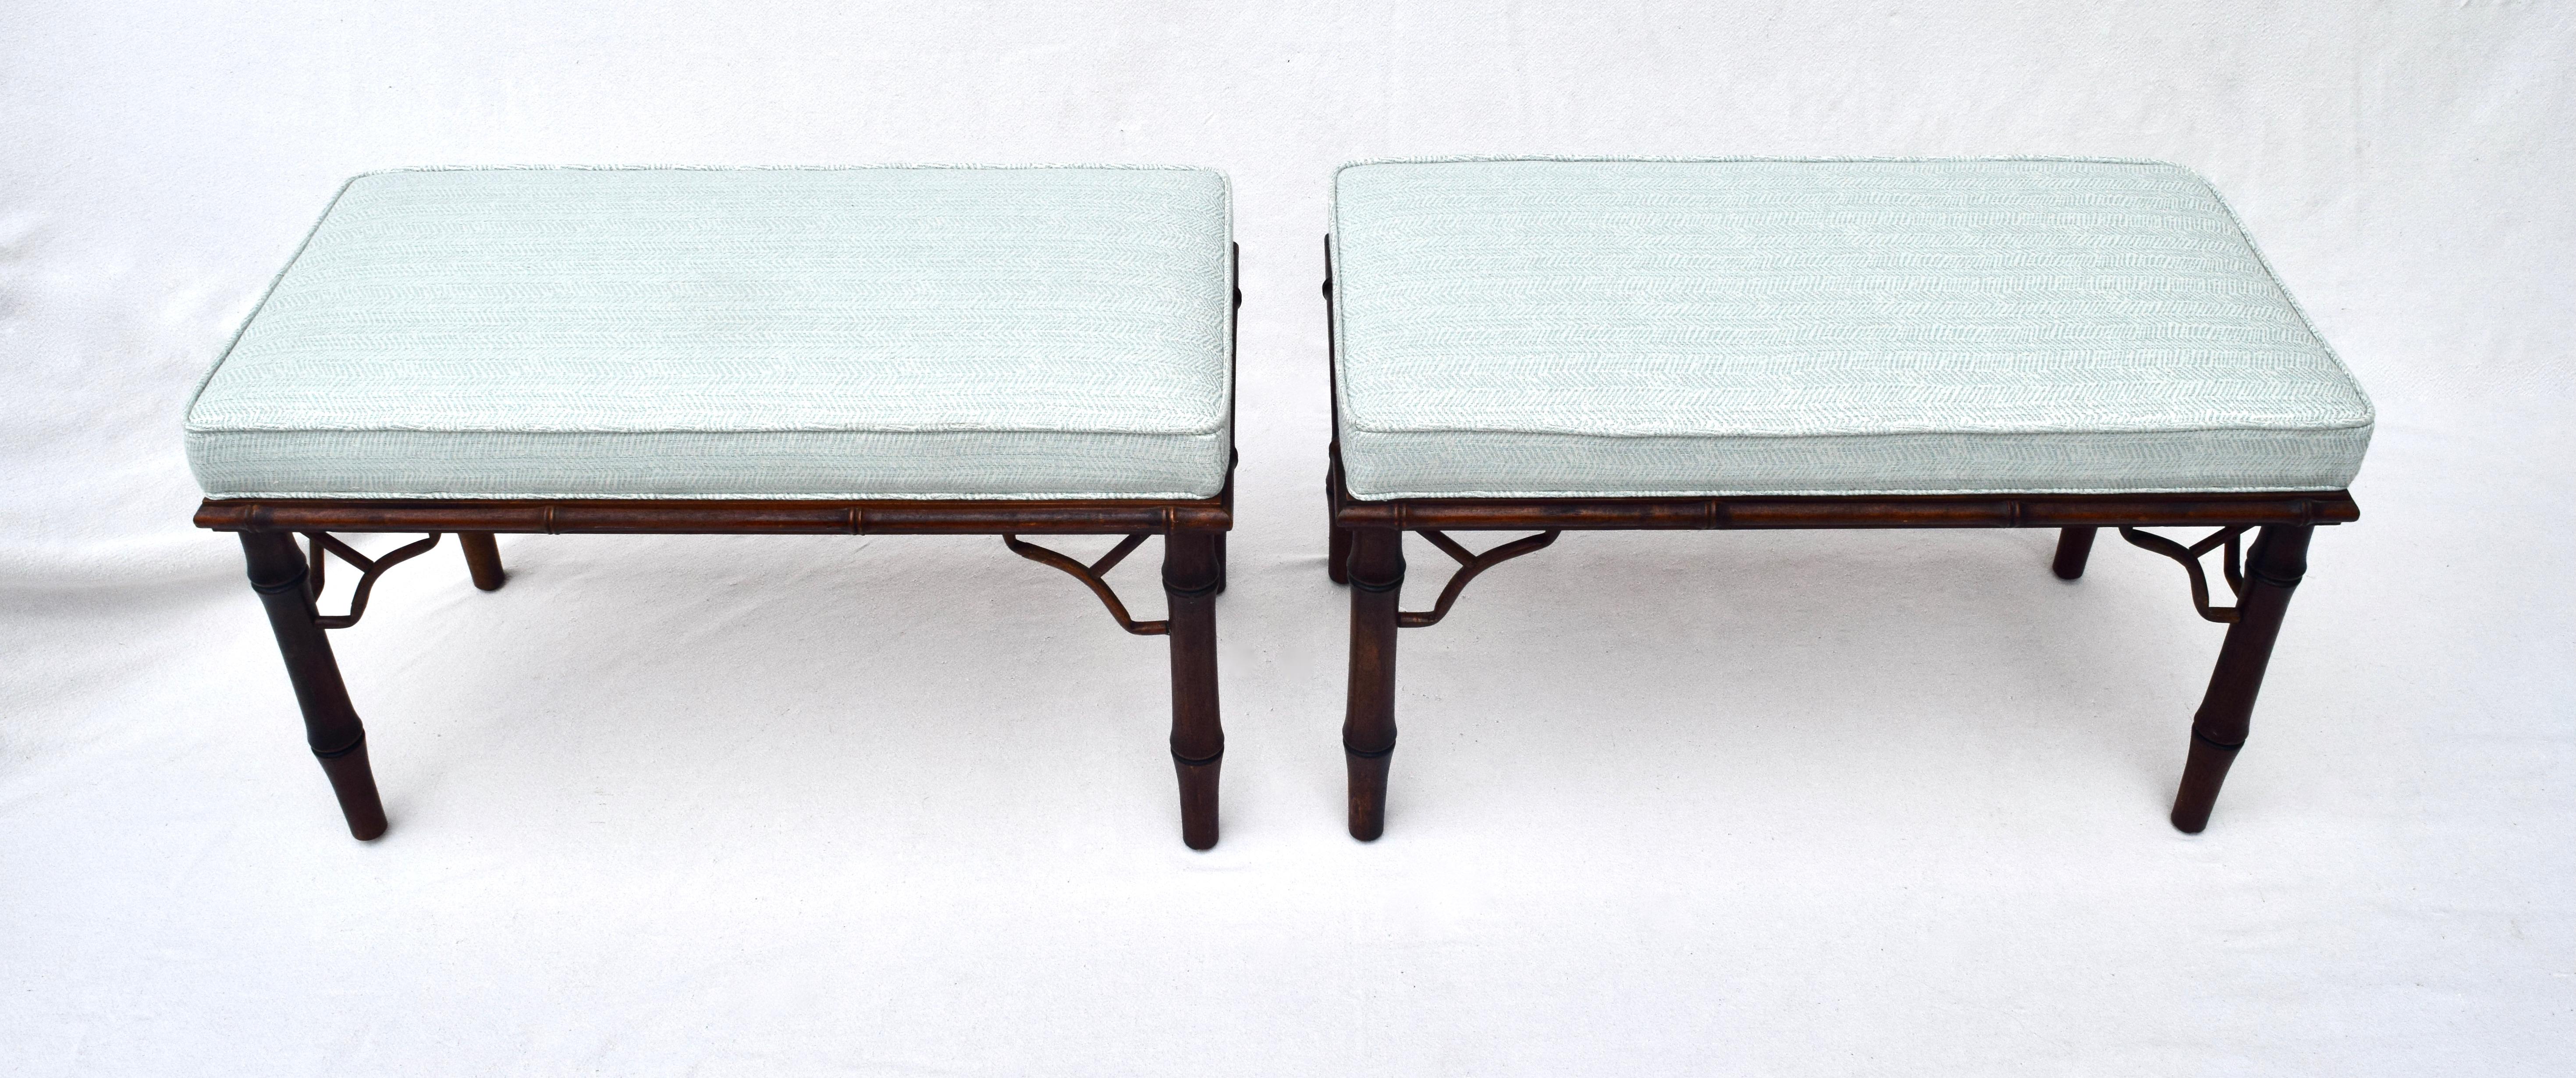 A pair of mahogany Chinese chippendale faux bamboo benches of generous proportions with new custom cushions upholstered in blue & white William Yeoward Herringbone Fabric.